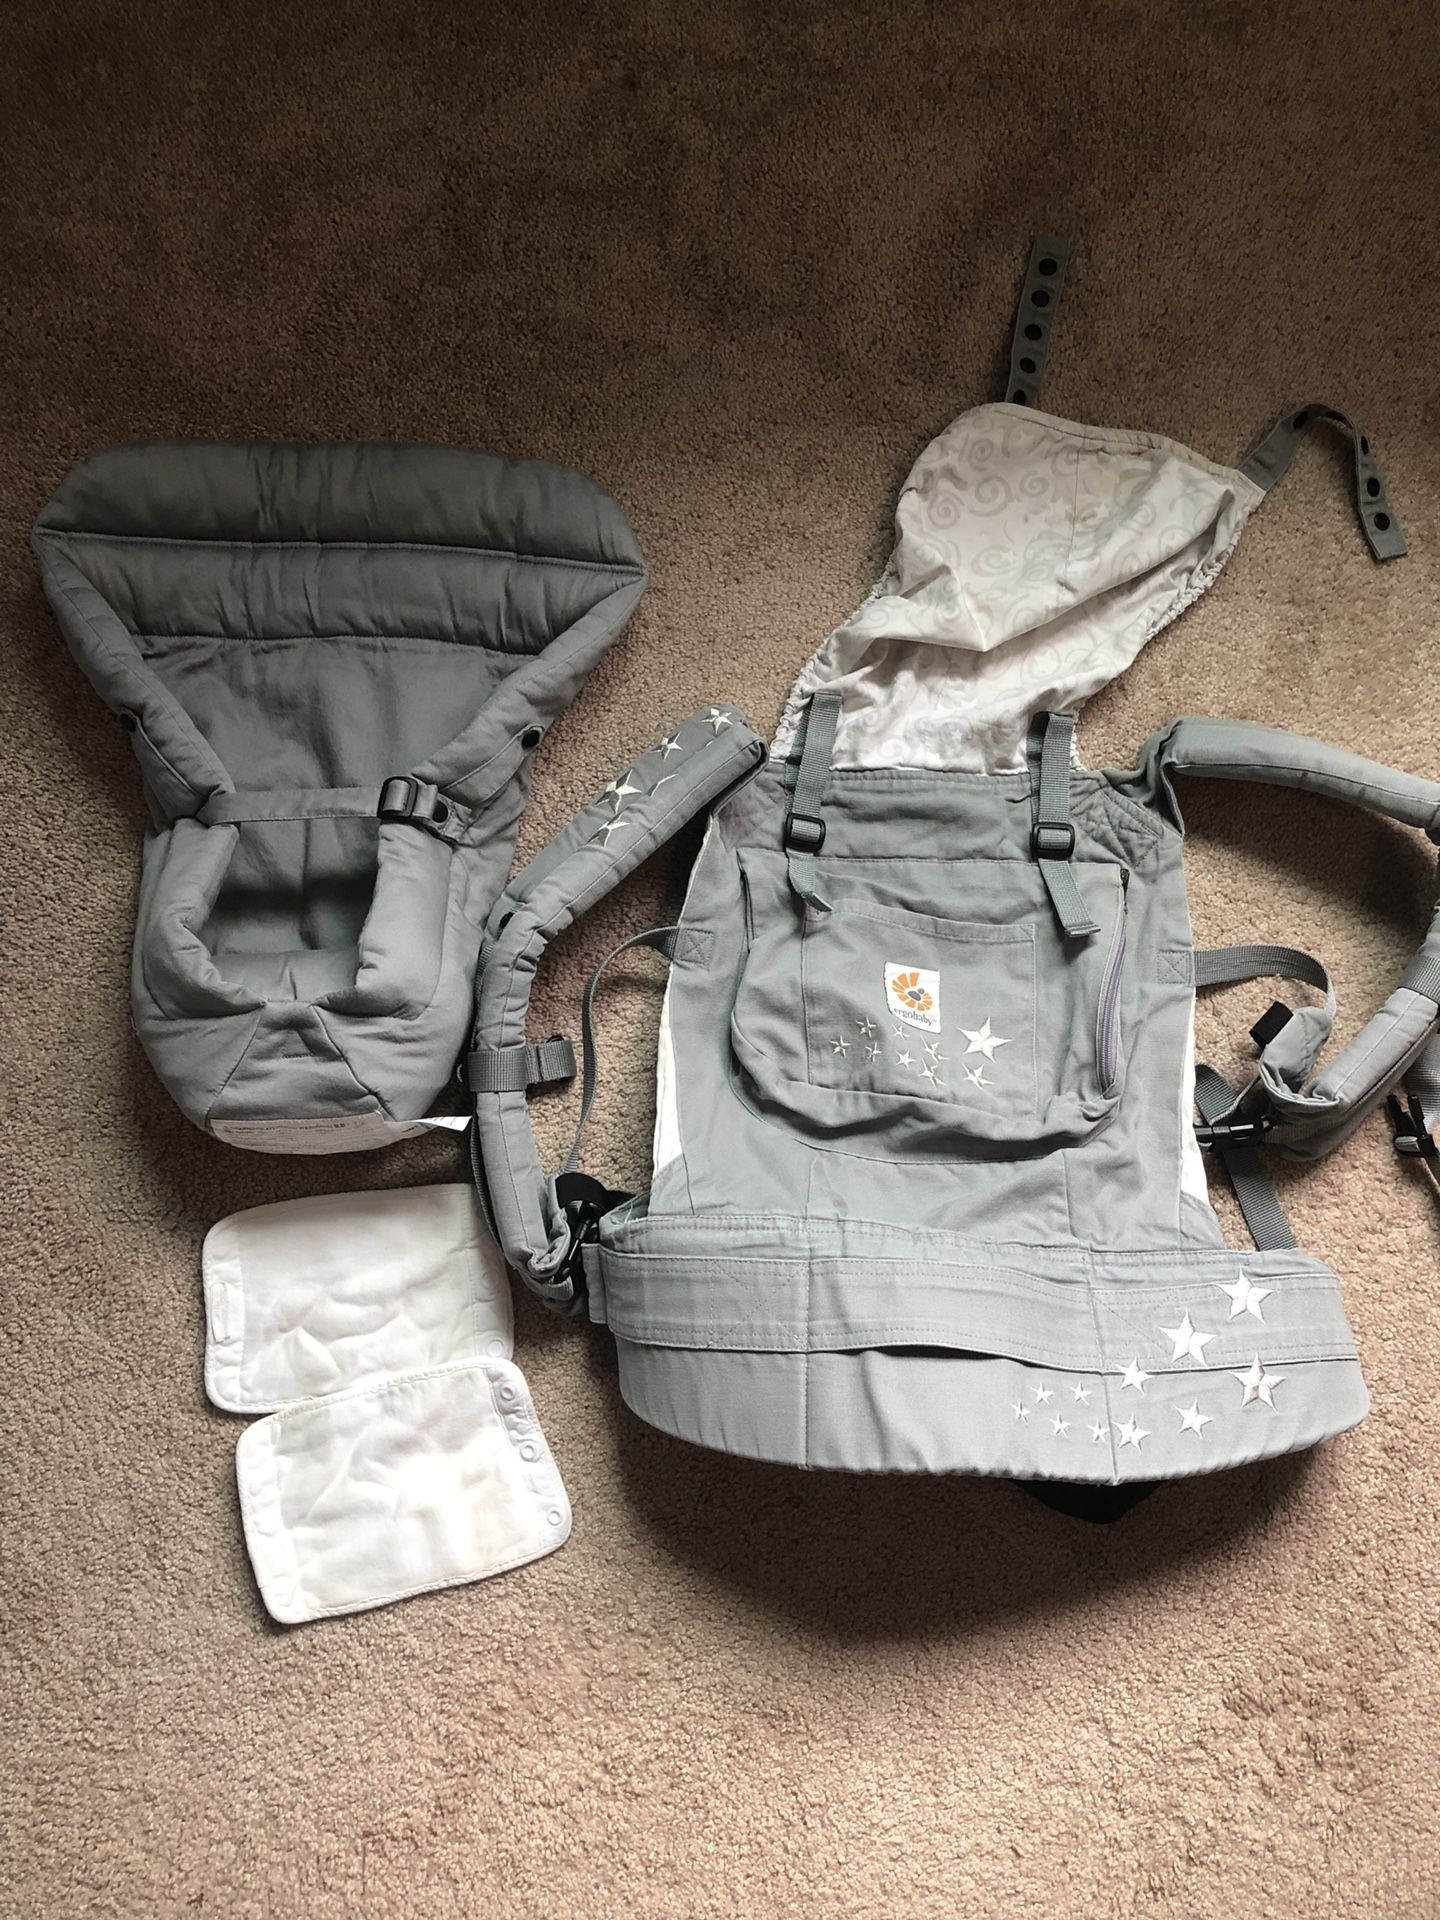 Ergo baby carrier w/ infant insert and drool pads